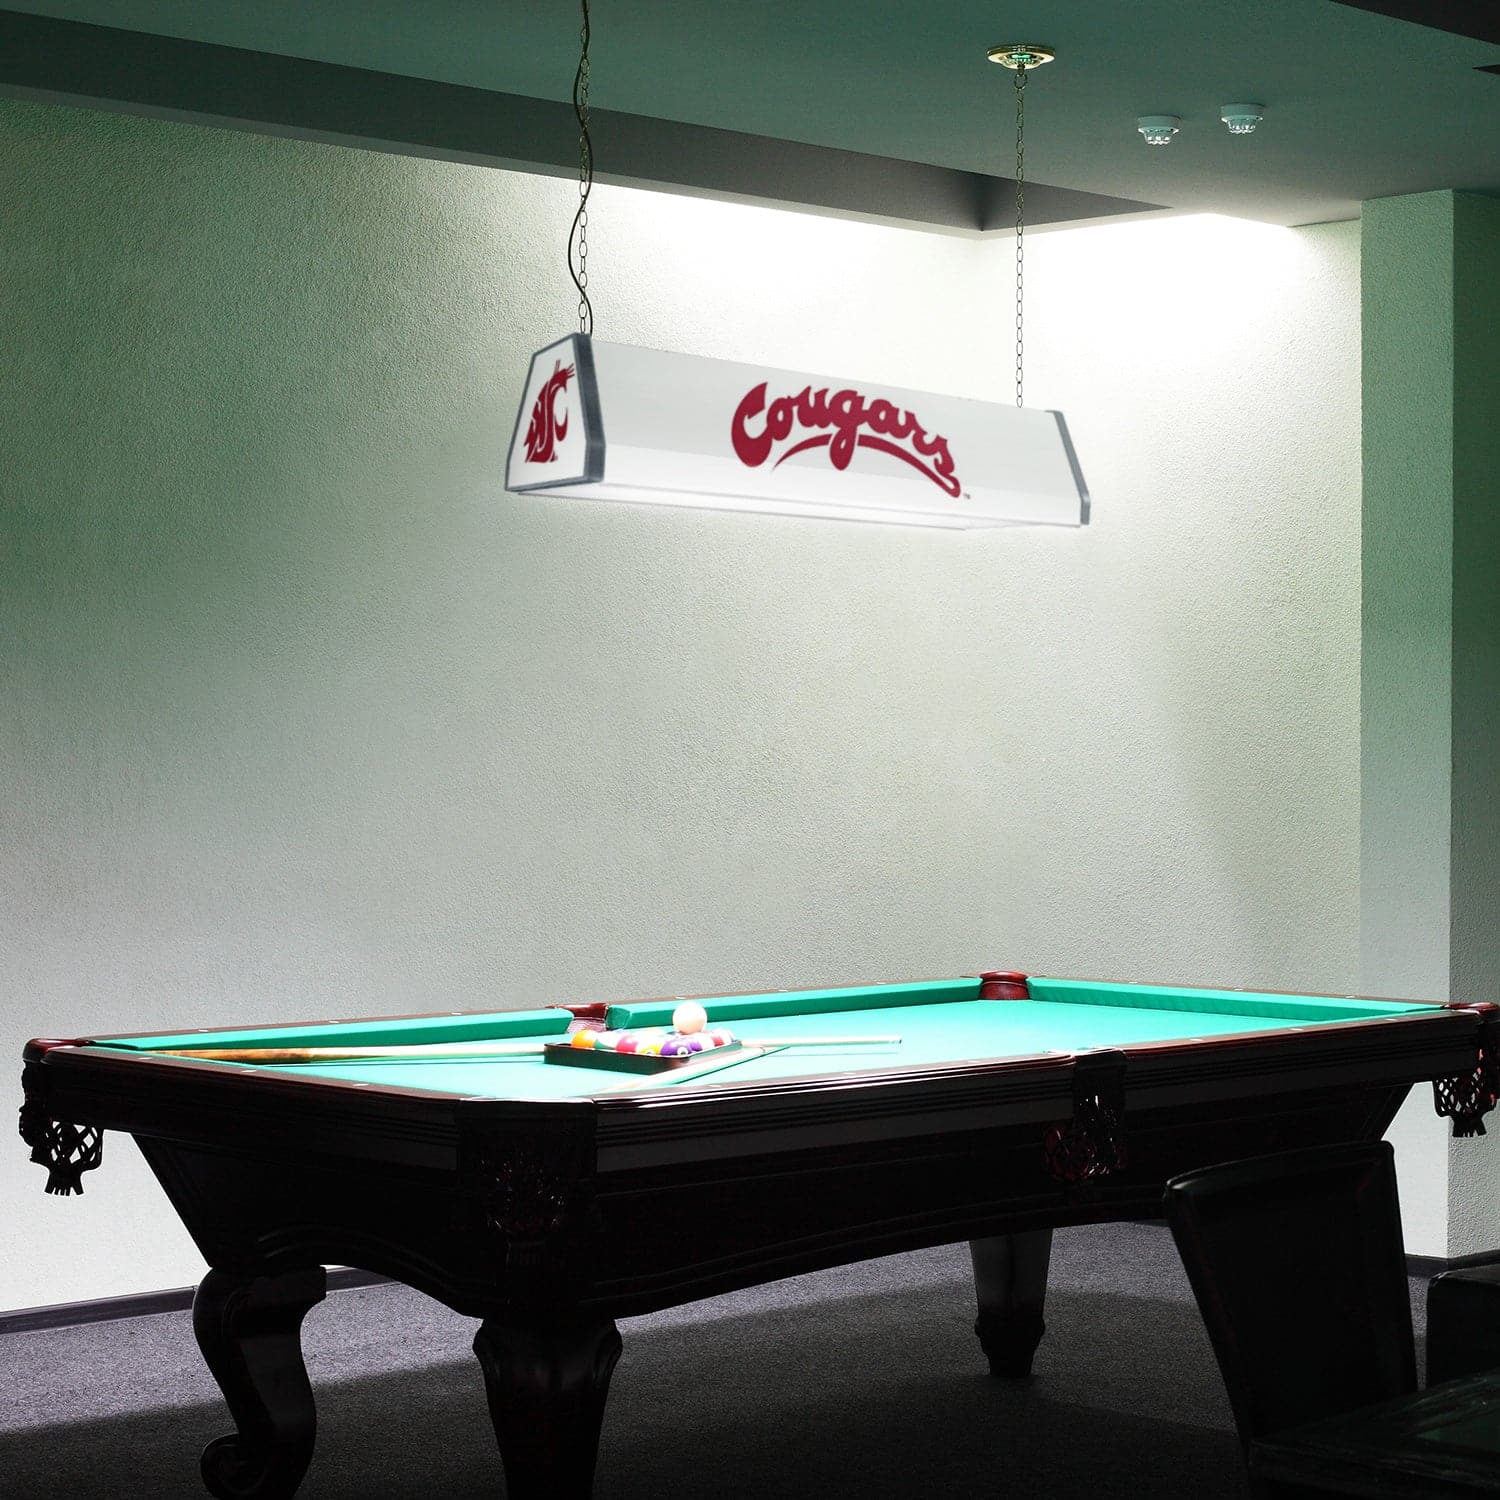 Washington State Cougars: Standard Pool Table Light - The Fan-Brand